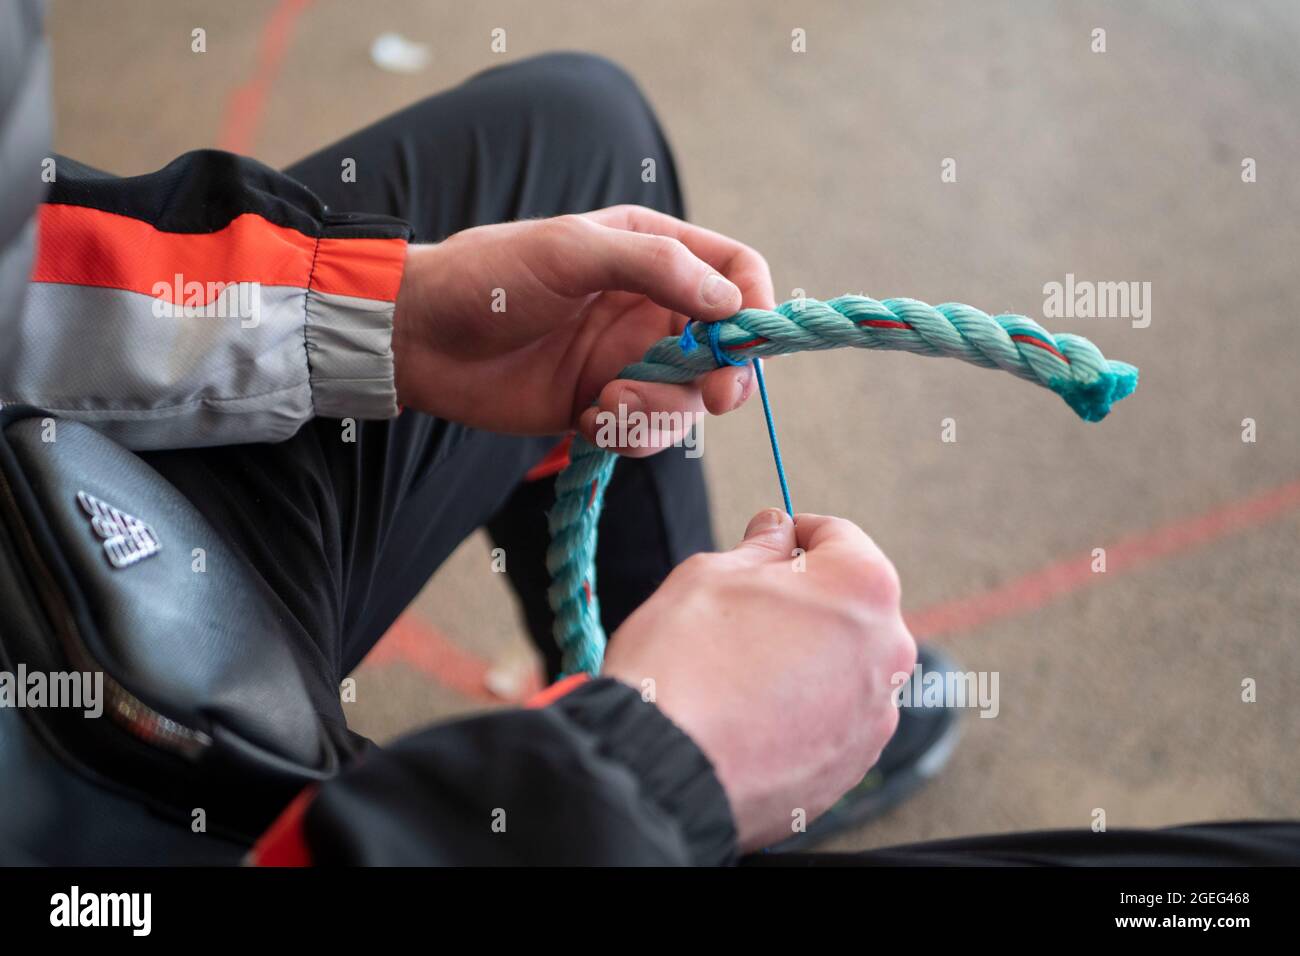 Technical college “Lycee Pierre Loti” in Paimpol (Brittany, north western France): mending of fishing nets and marlinespike seamanship, students in a Stock Photo